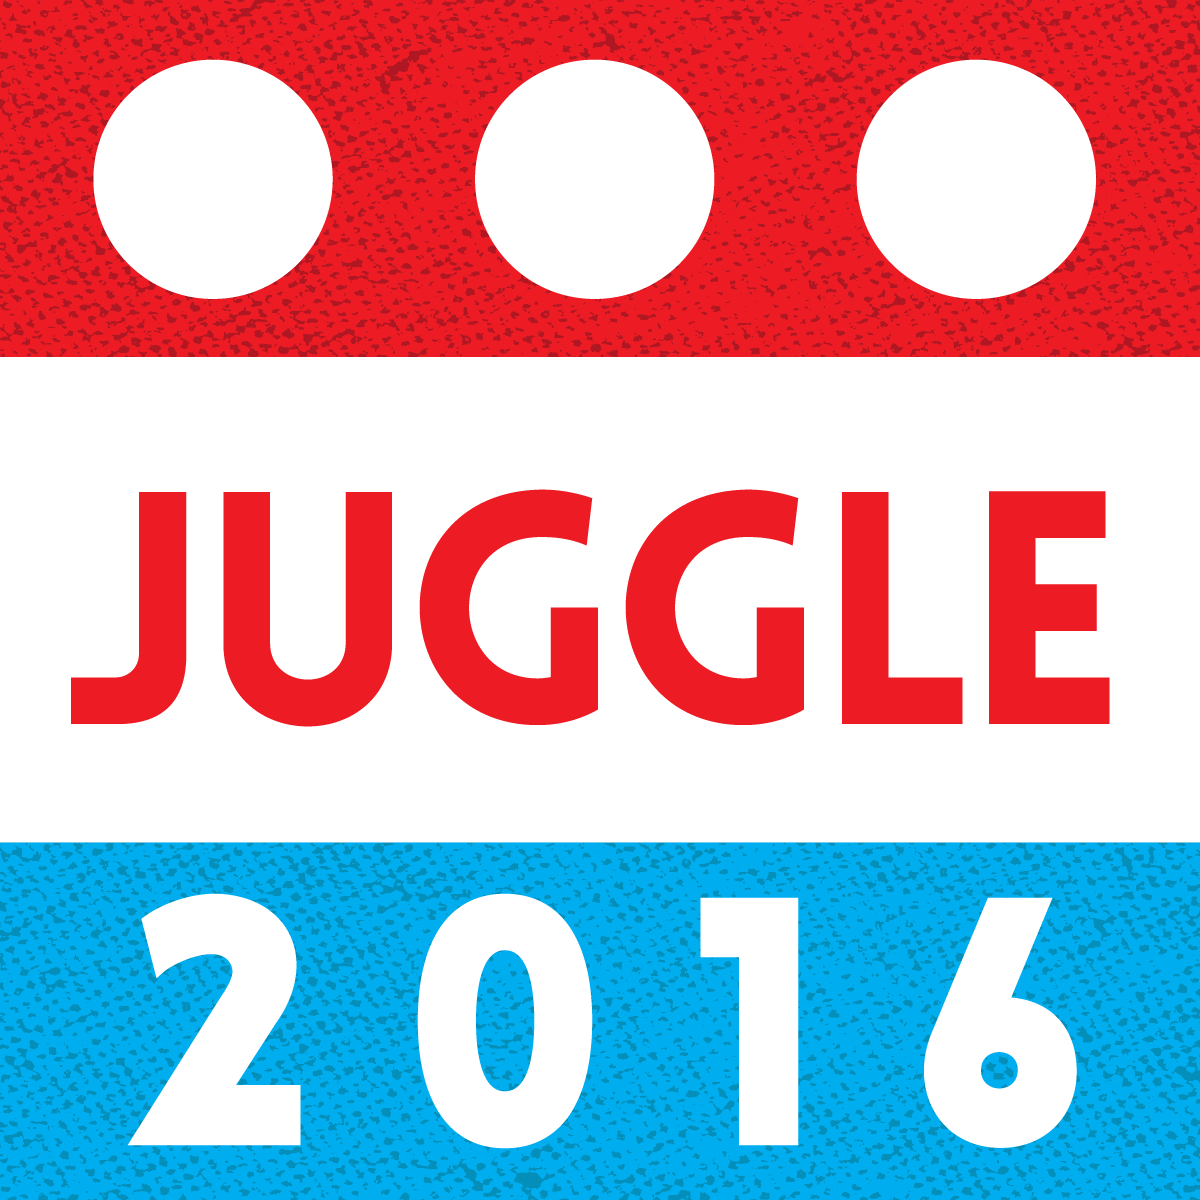 Tired of the clowns? Come play with the jugglers!